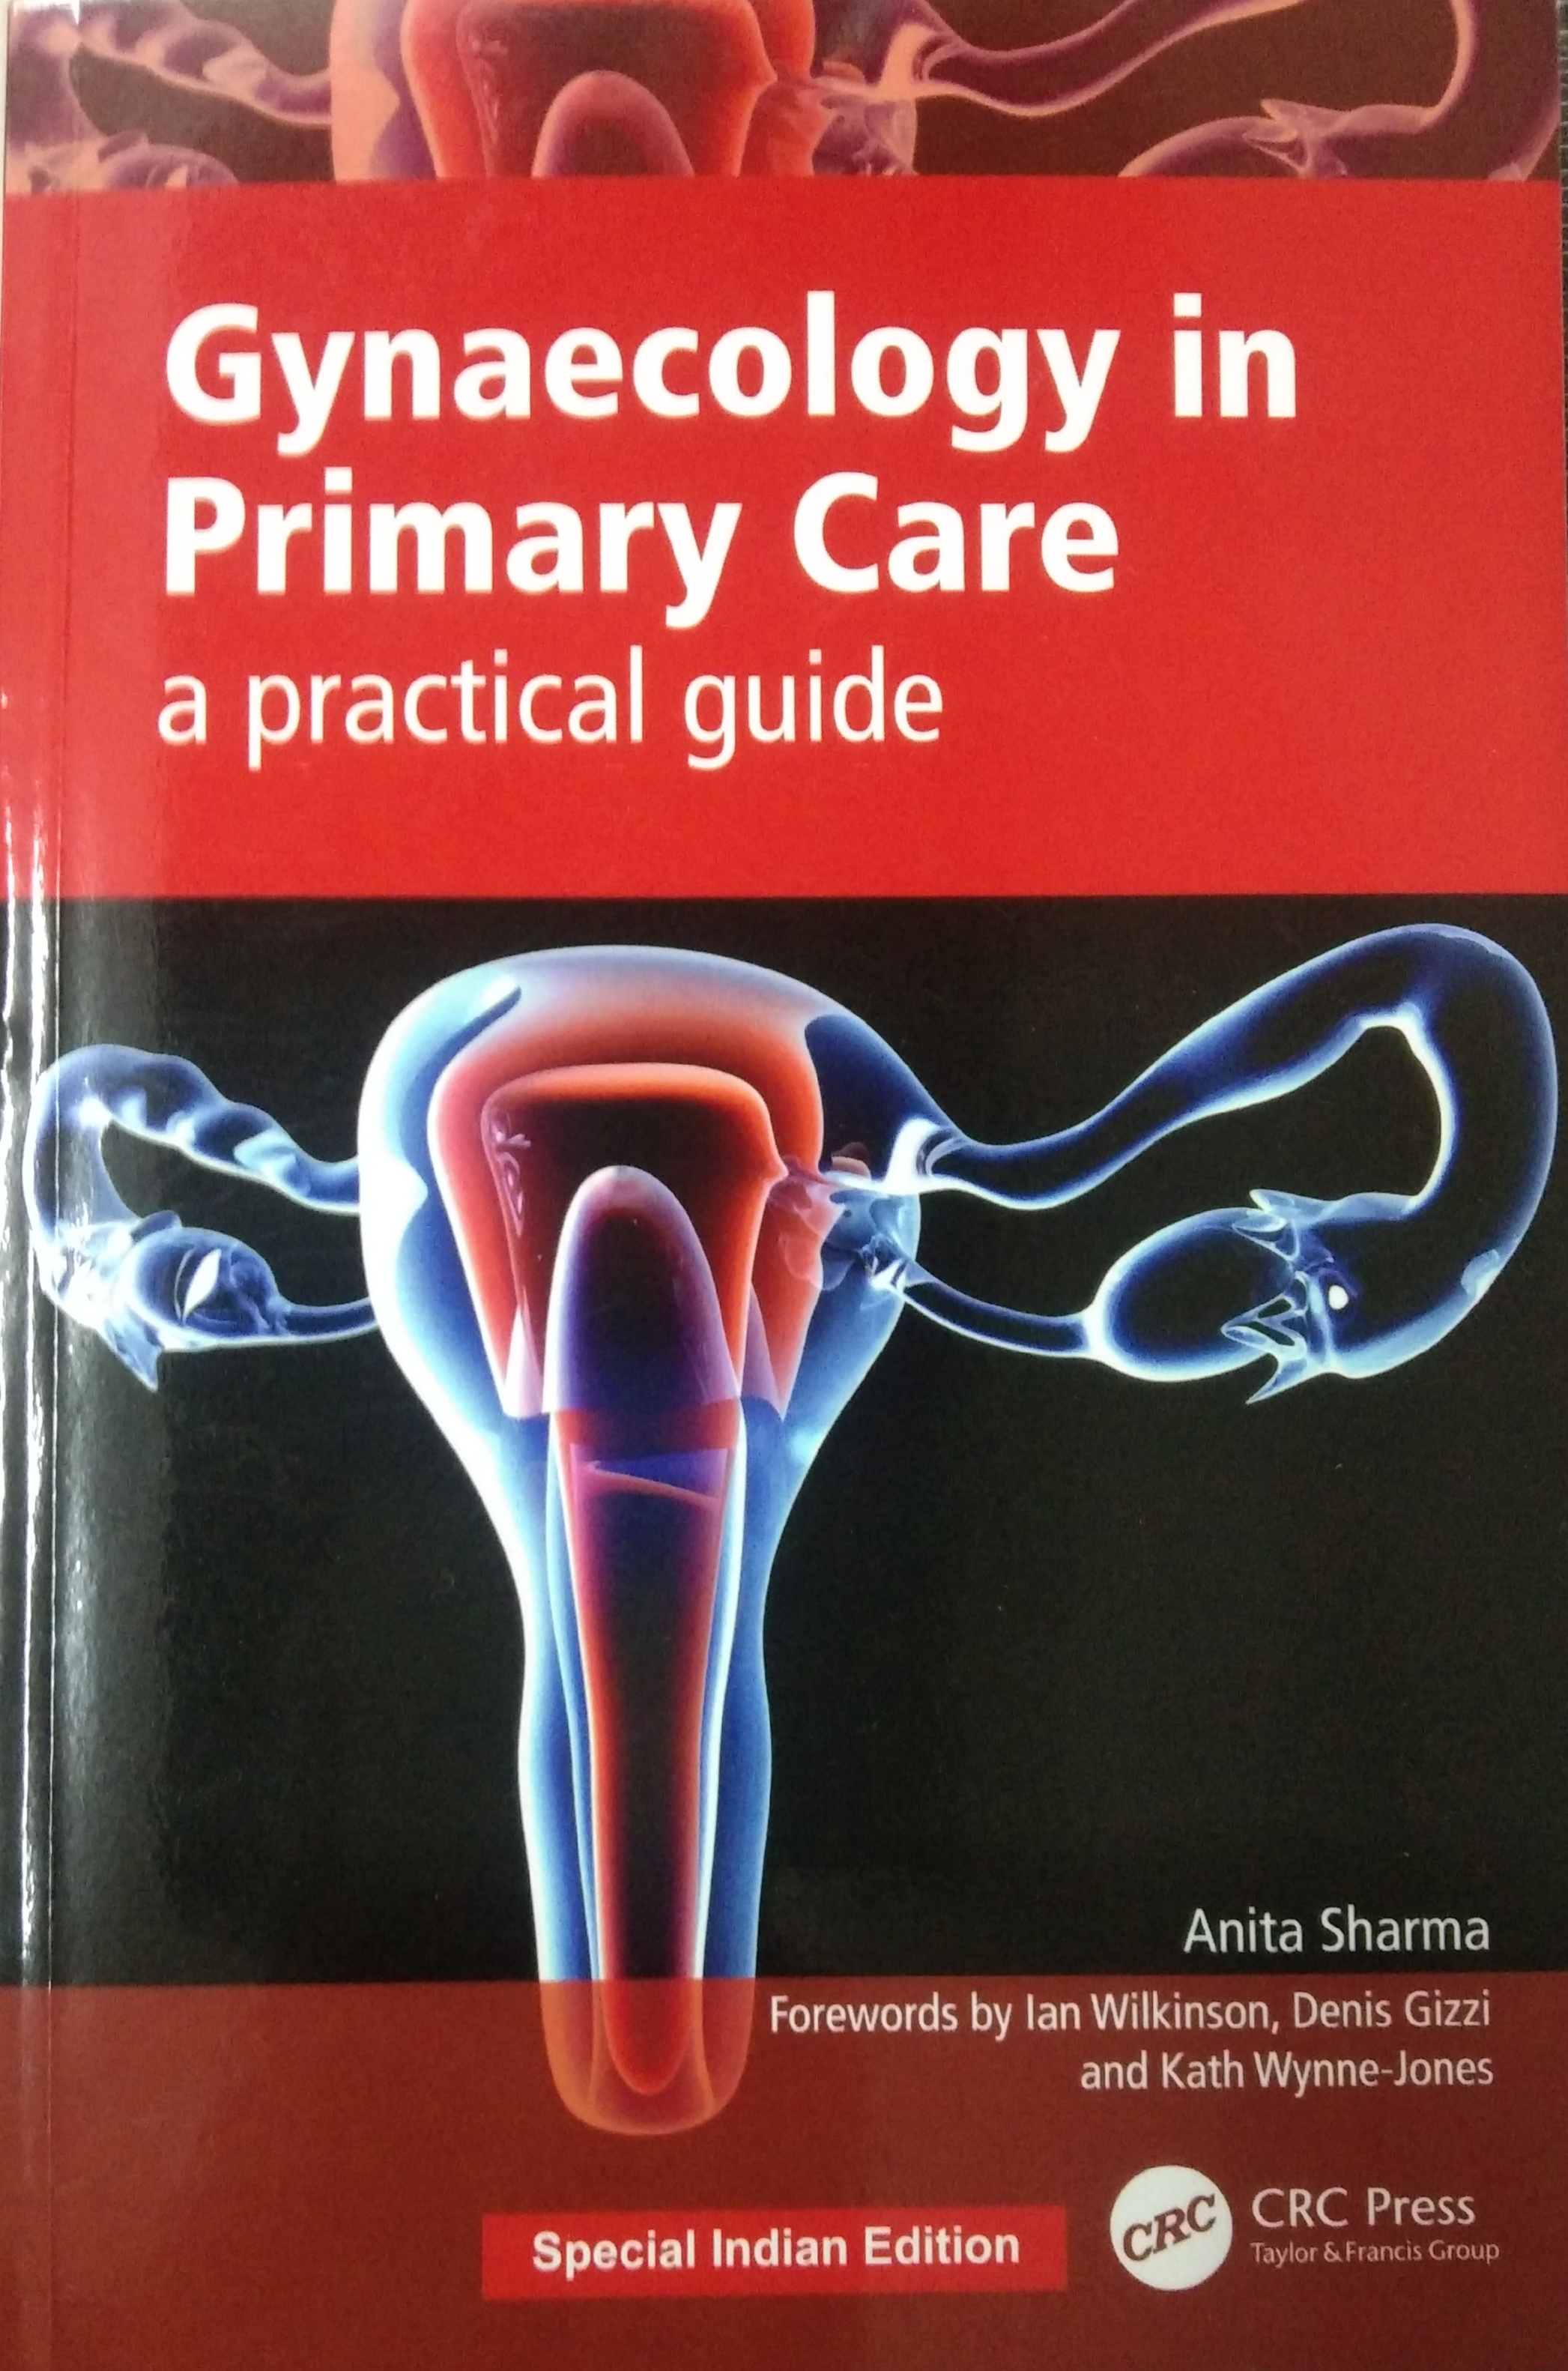 

surgical-sciences/obstetrics-and-gynecology/gynaecology-in-primary-care-a-practical-guide--9781846195747